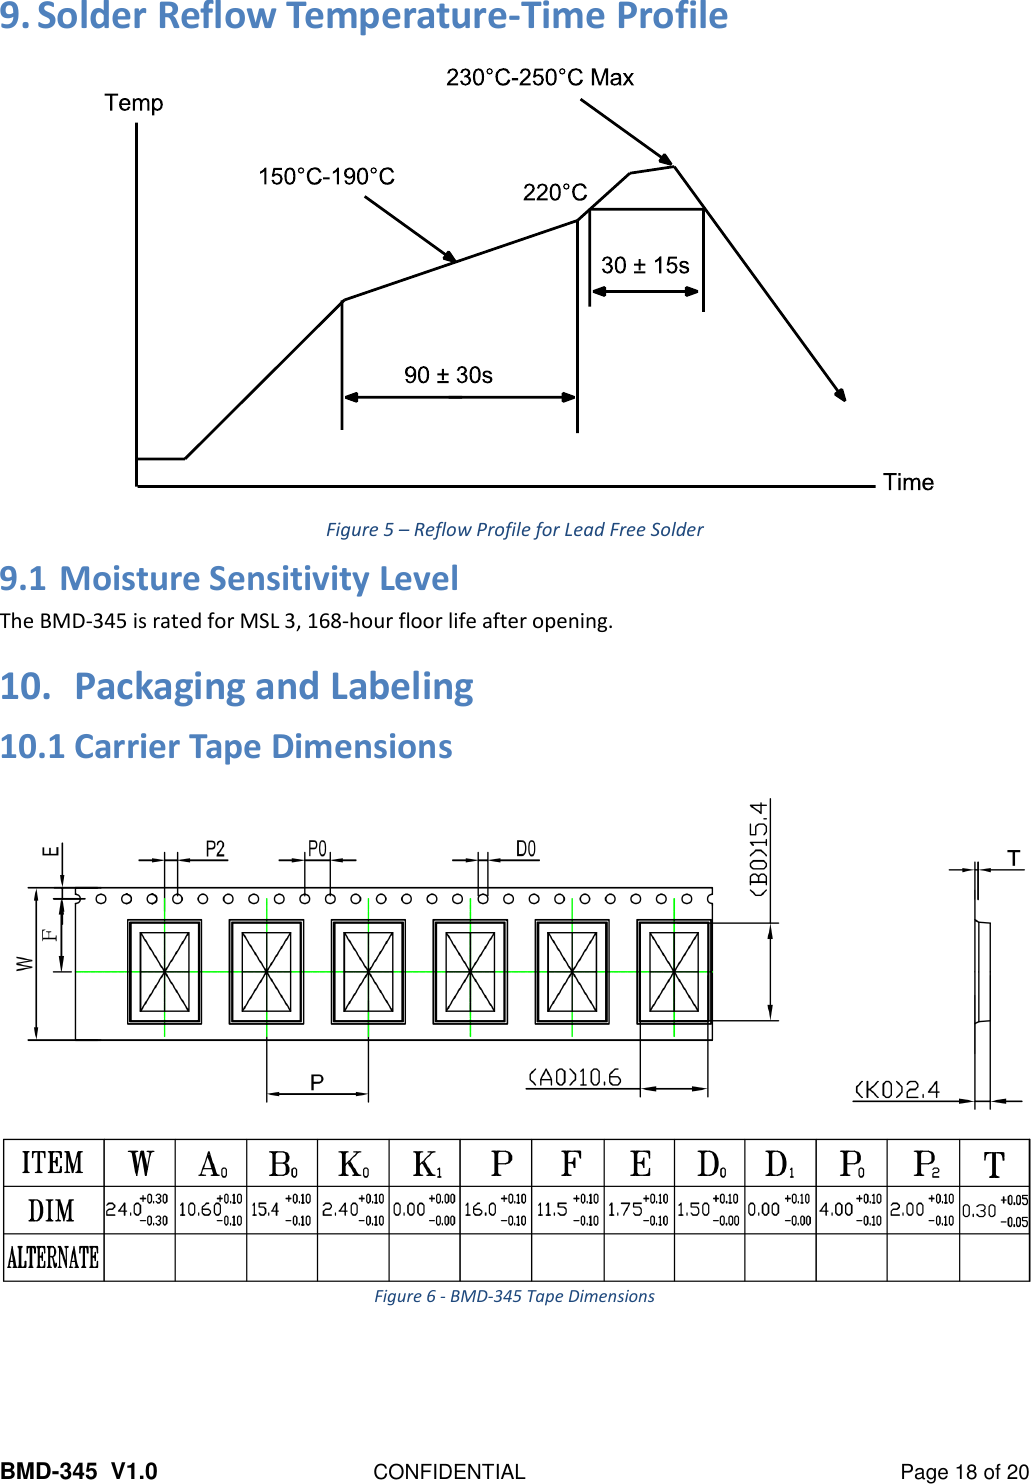 BMD-345  V1.0  CONFIDENTIAL  Page 18 of 20 9. Solder Reflow Temperature-Time Profile  Figure 5 – Reflow Profile for Lead Free Solder 9.1 Moisture Sensitivity Level The BMD-345 is rated for MSL 3, 168-hour floor life after opening. 10. Packaging and Labeling 10.1 Carrier Tape Dimensions  Figure 6 - BMD-345 Tape Dimensions  